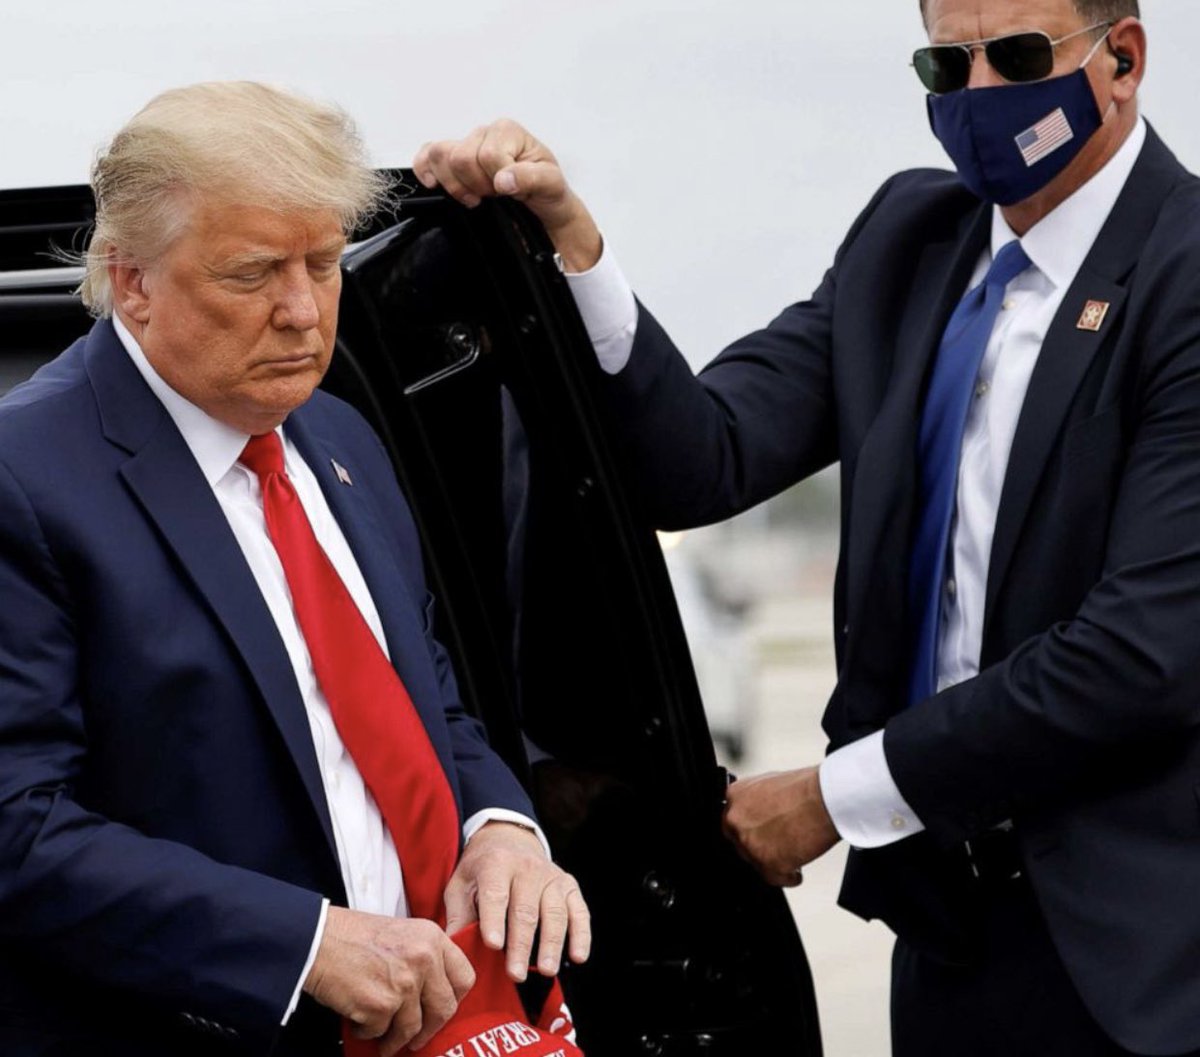 I’ve said it before and I’ll say it again, Trump should lose his Secret Service protection and pension if he is convicted! Raise your hand 🤚 and Repost if you agree!